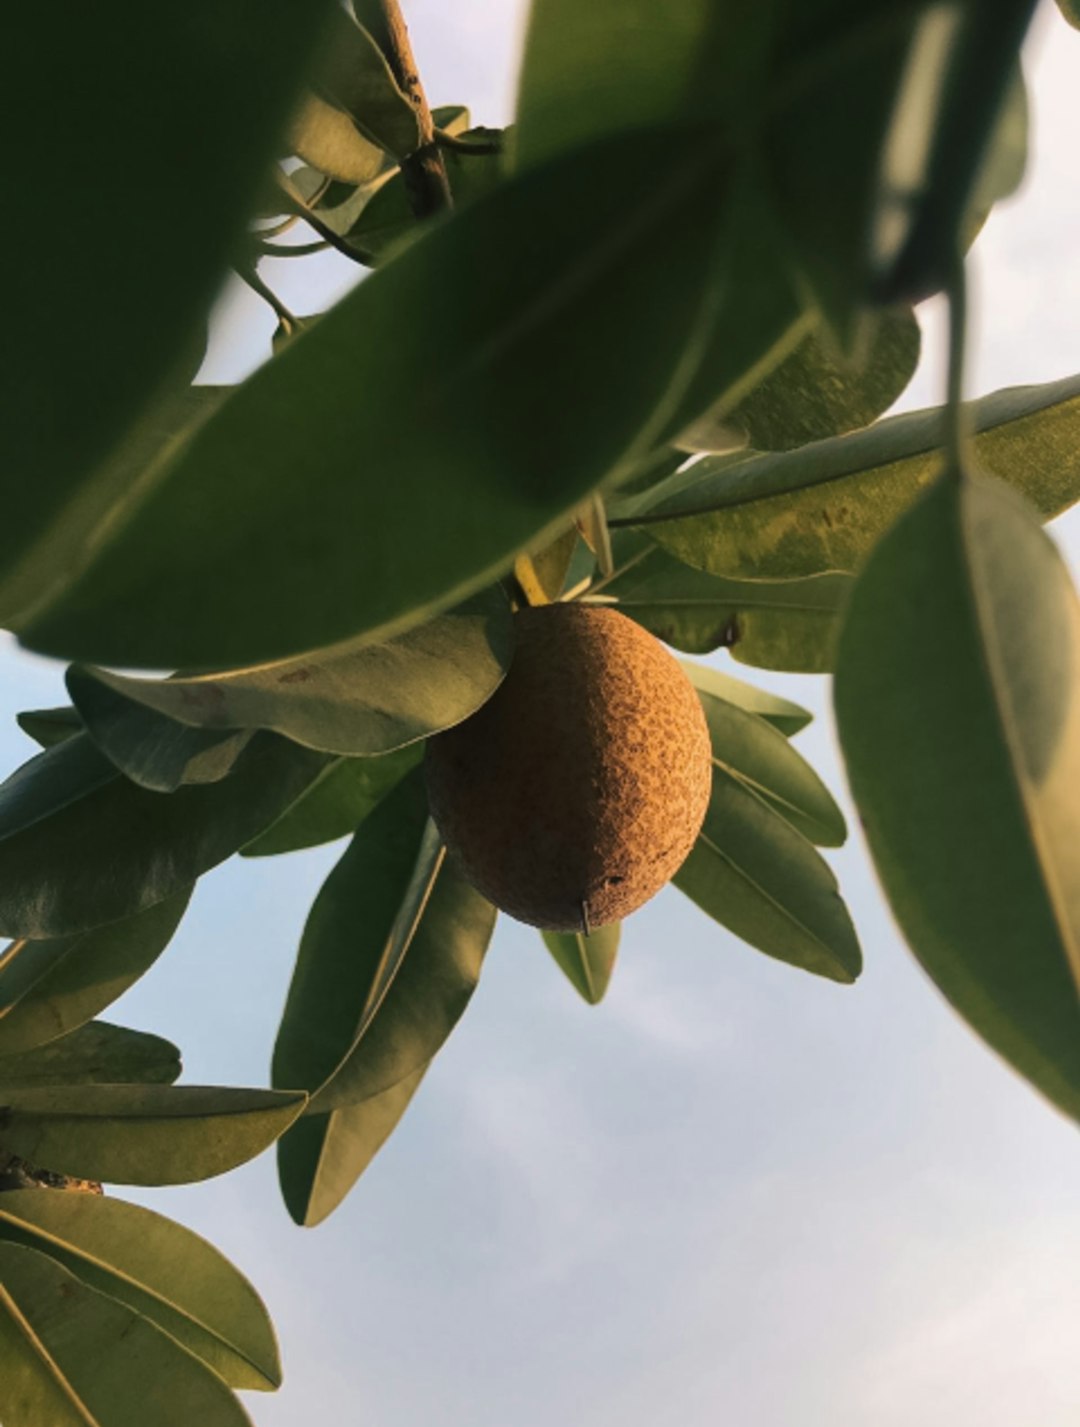 jungleboogie, mango tree, a fruit hanging from a tree branch with sky in the background